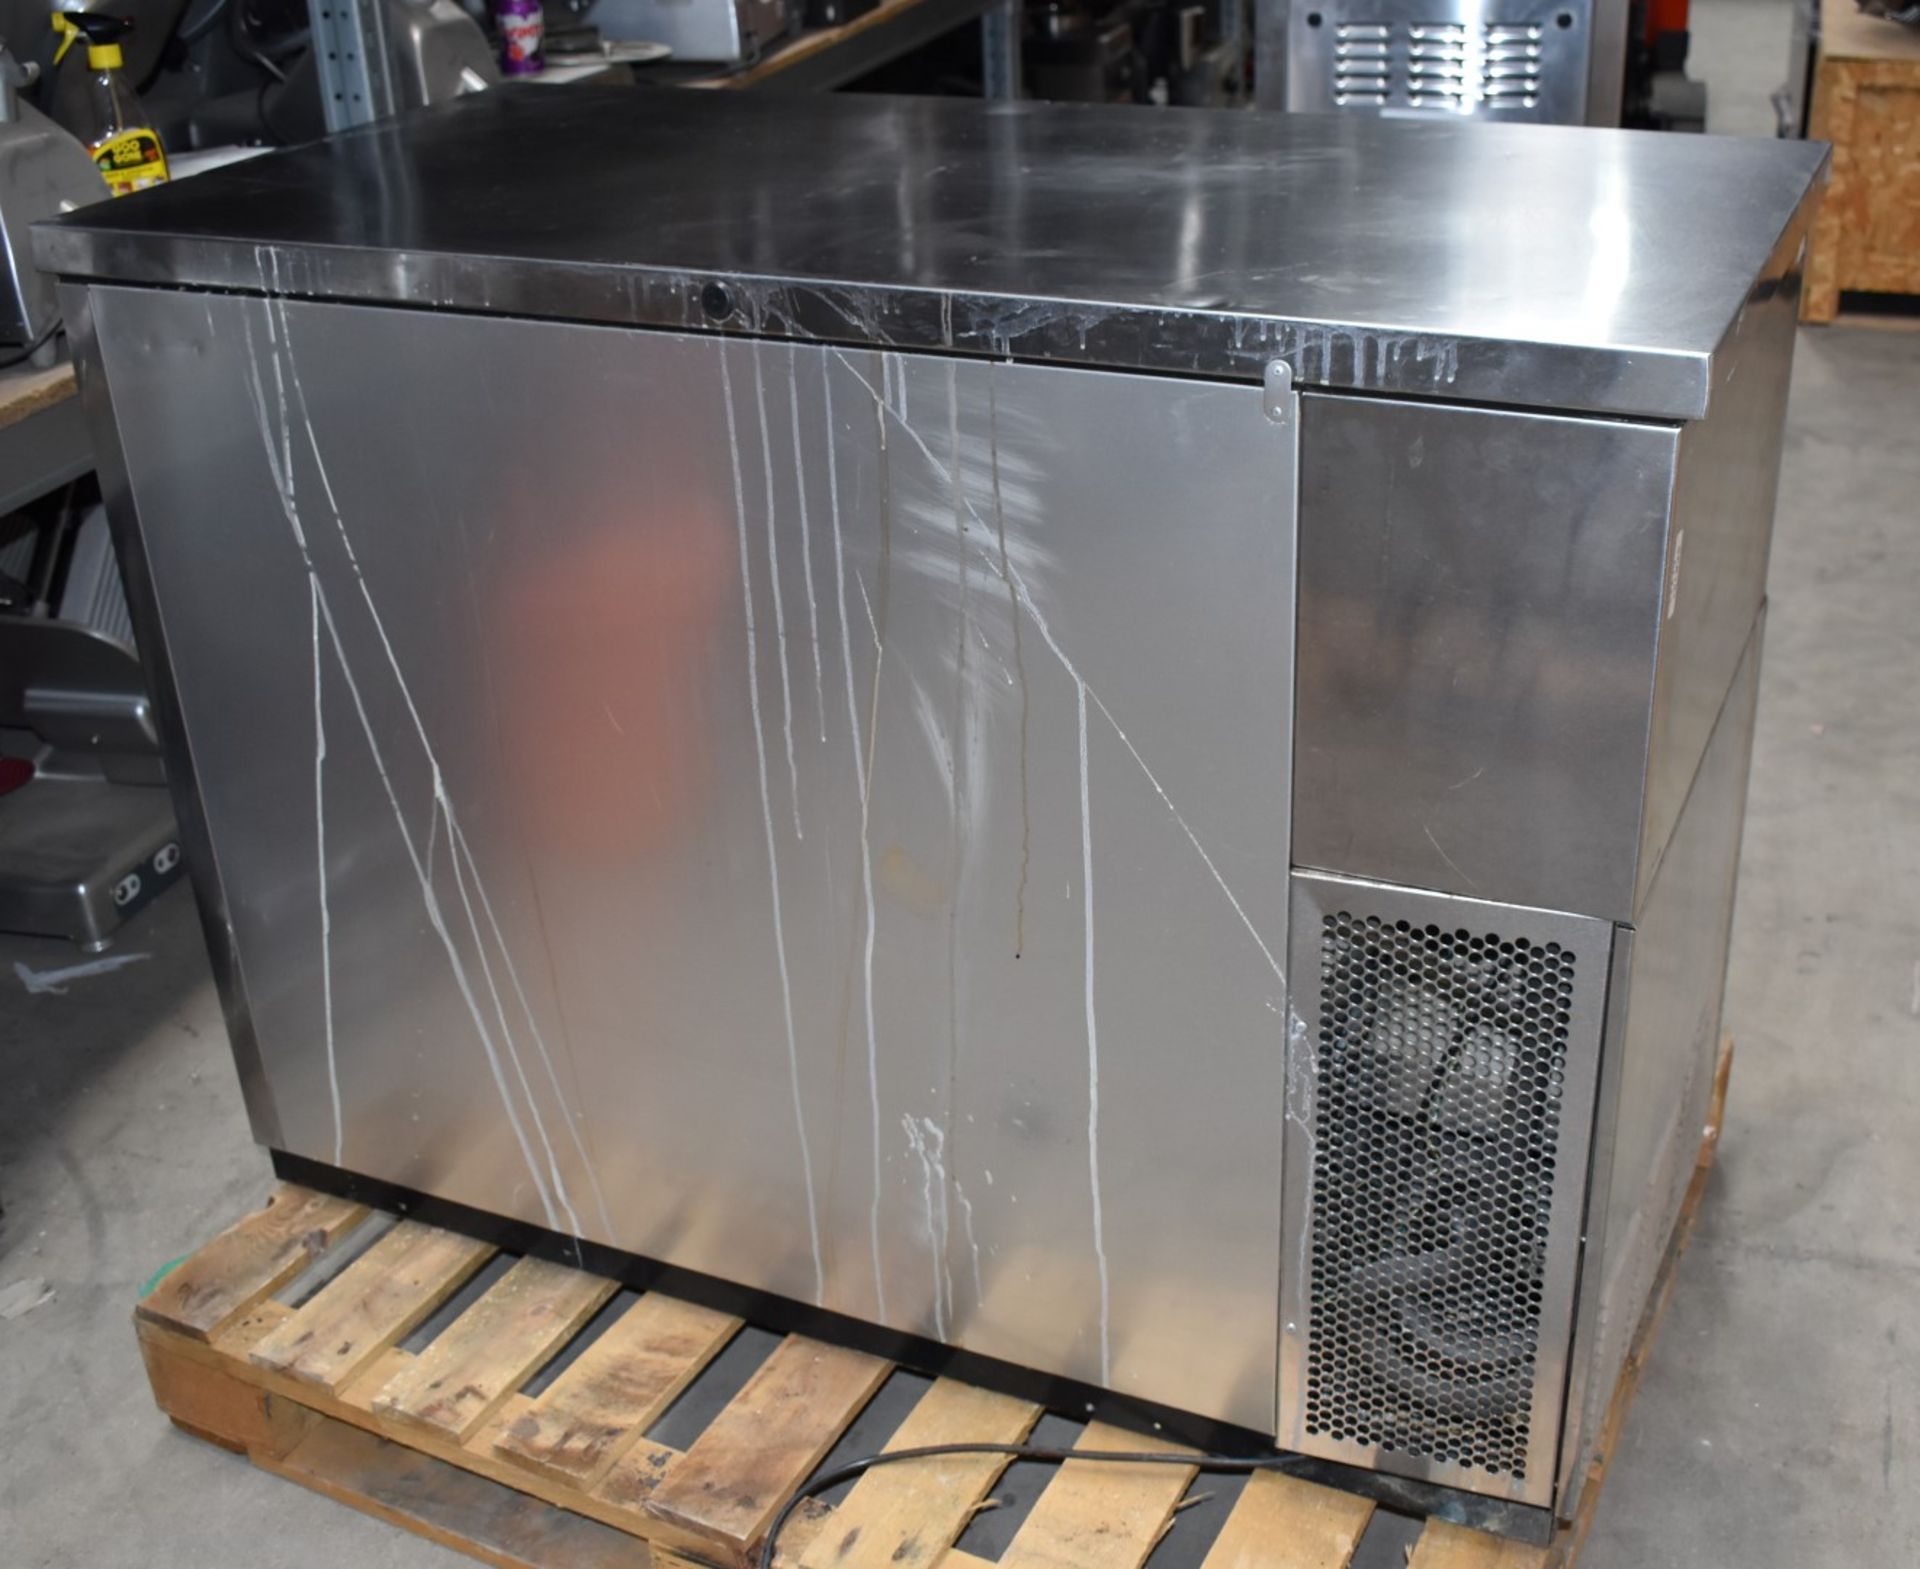 1 x True Back Bar Bottle Cooler With Solid Stainless Steel Doors and Counter Top - Model TBB-24-48-S - Image 5 of 11